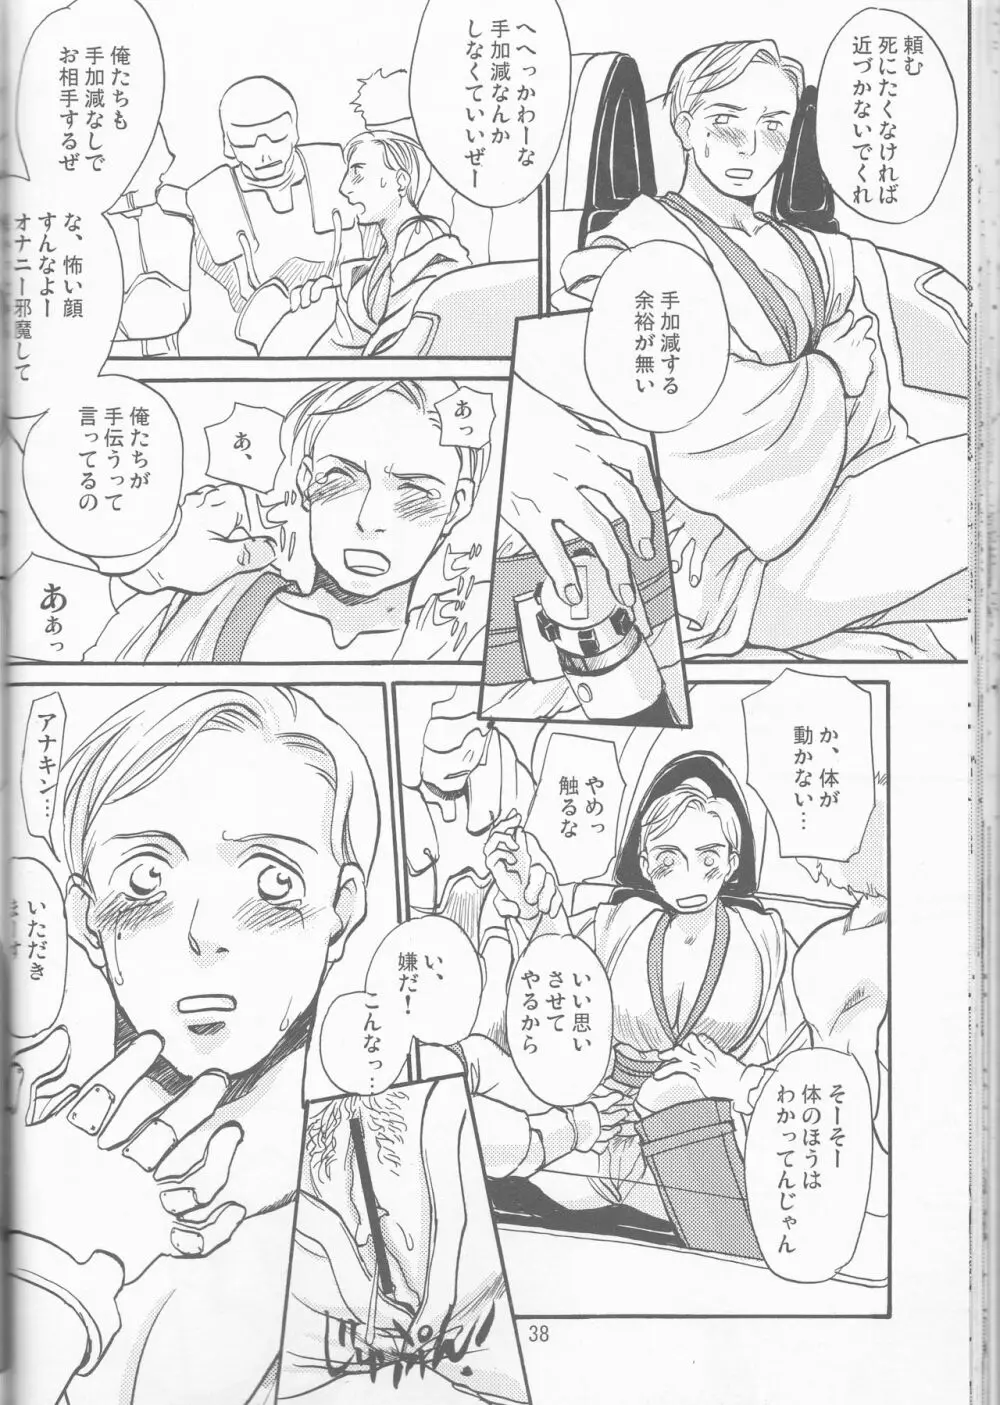 Obi Female Transformation Book 1 of 2 Page.38